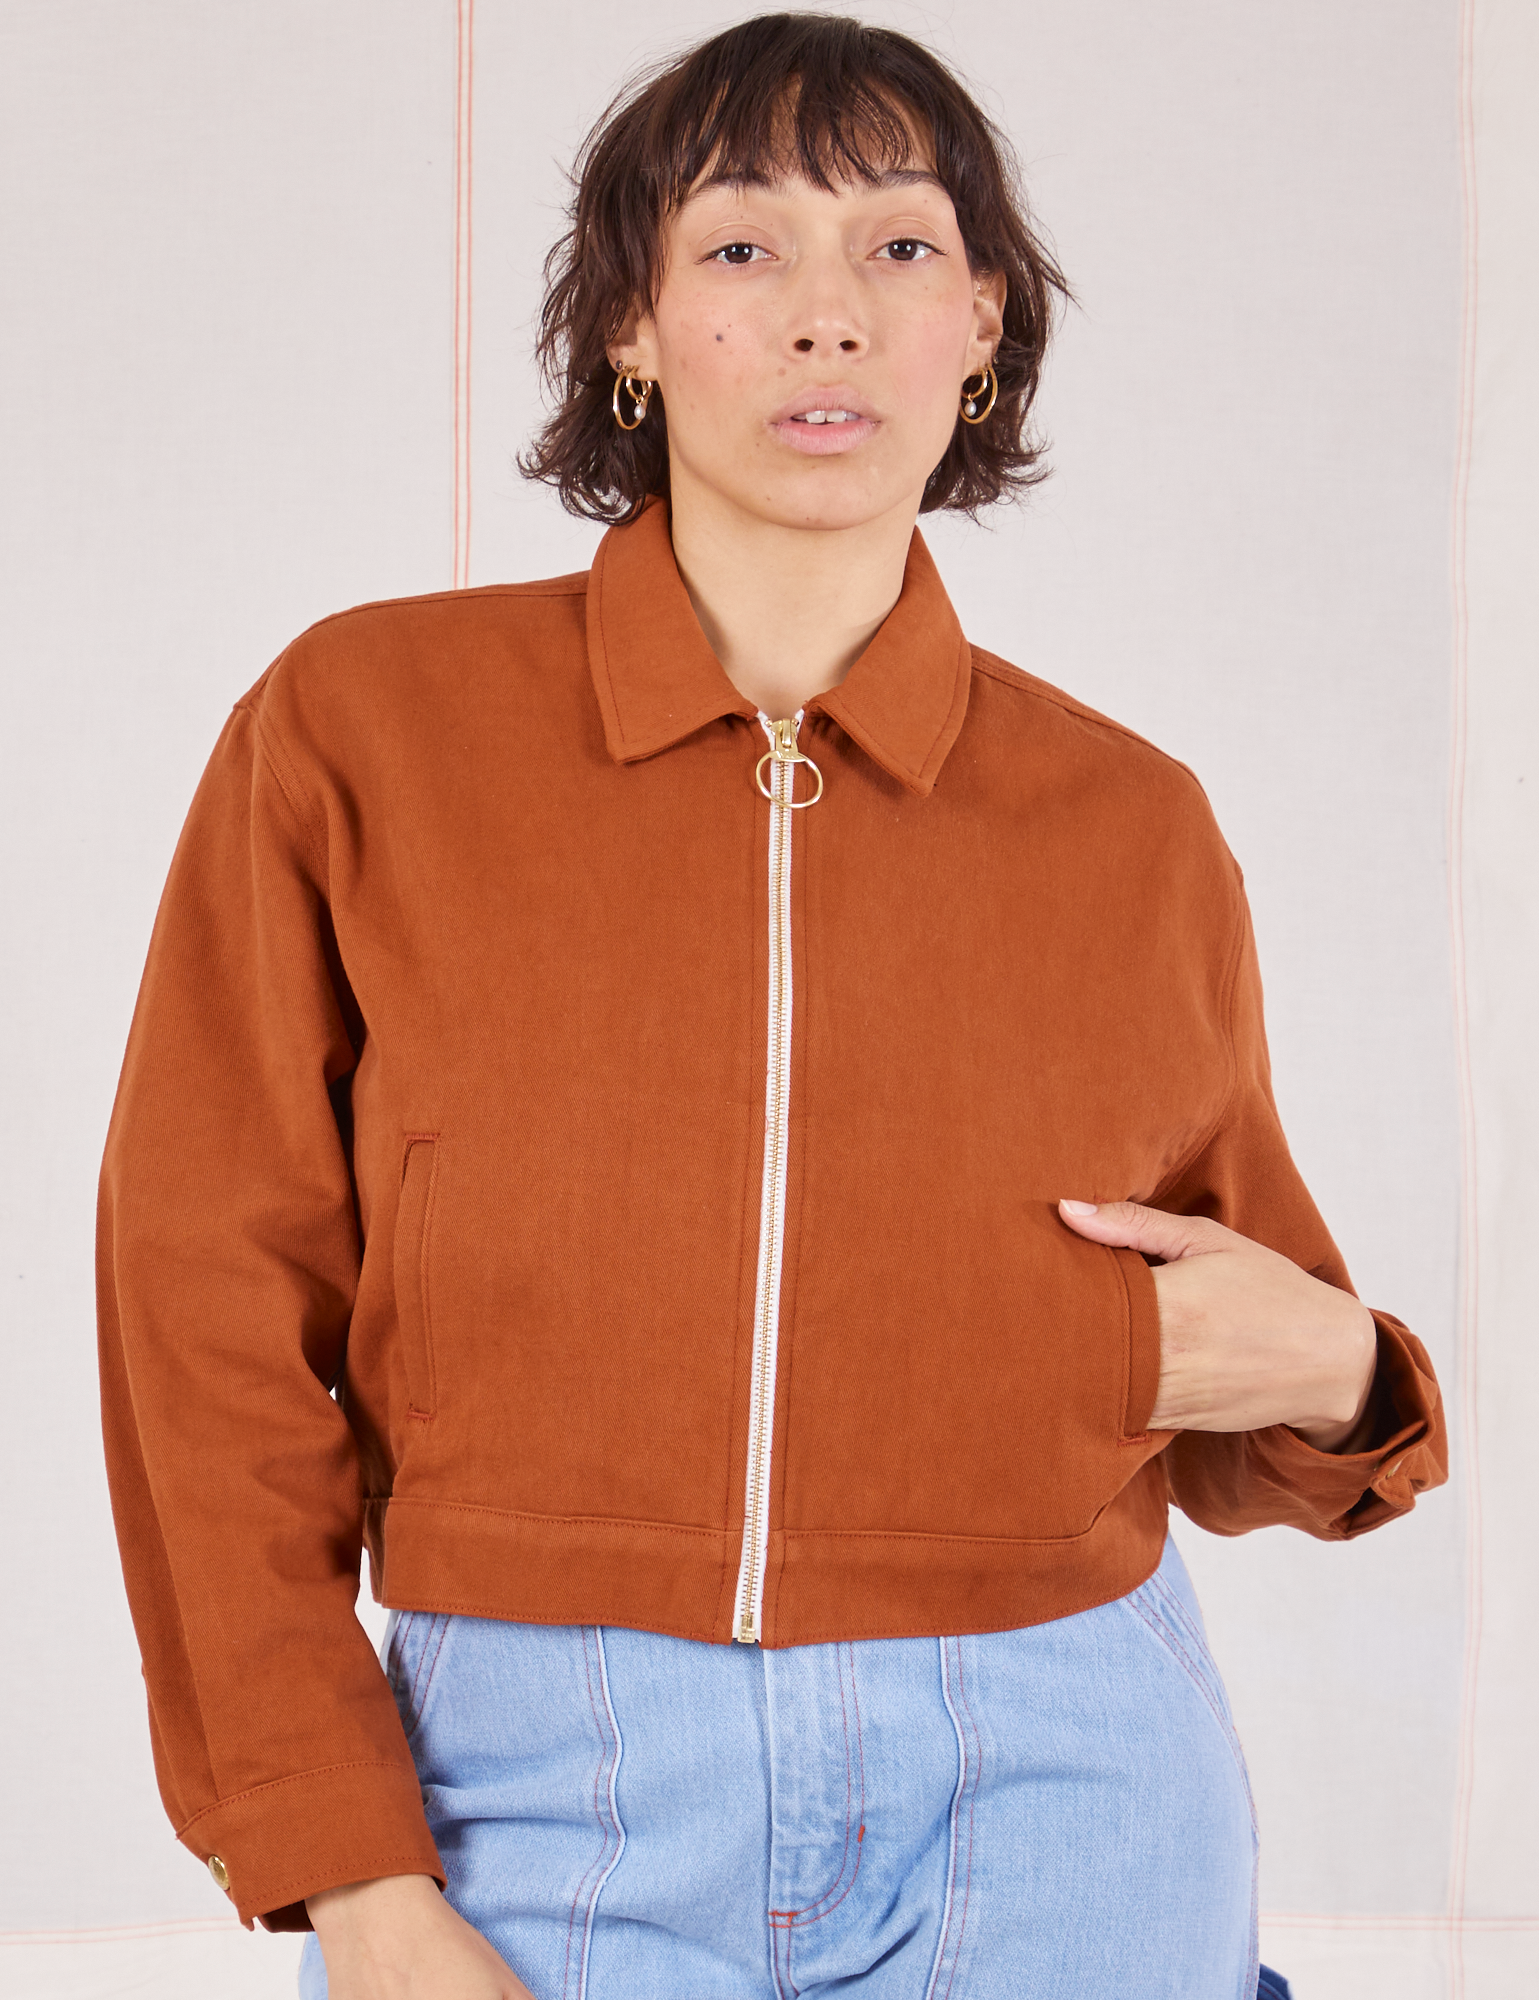 Tiara is wearing a zipped up Ricky Jacket in Burnt Terracotta